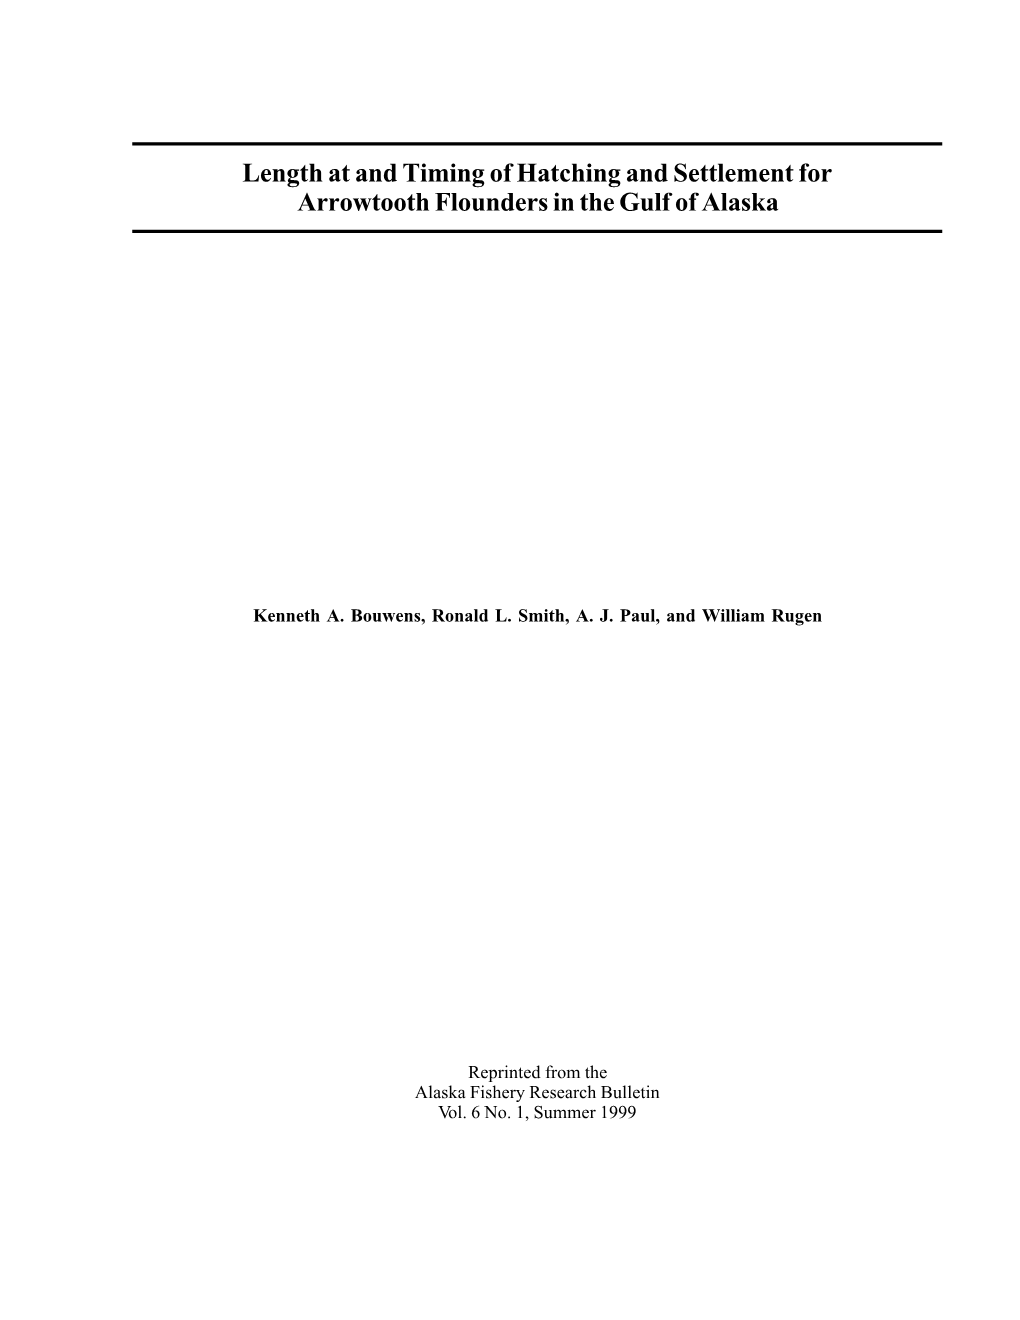 Length at and Timing of Hatching and Settlement for Arrowtooth Flounders in the Gulf of Alaska